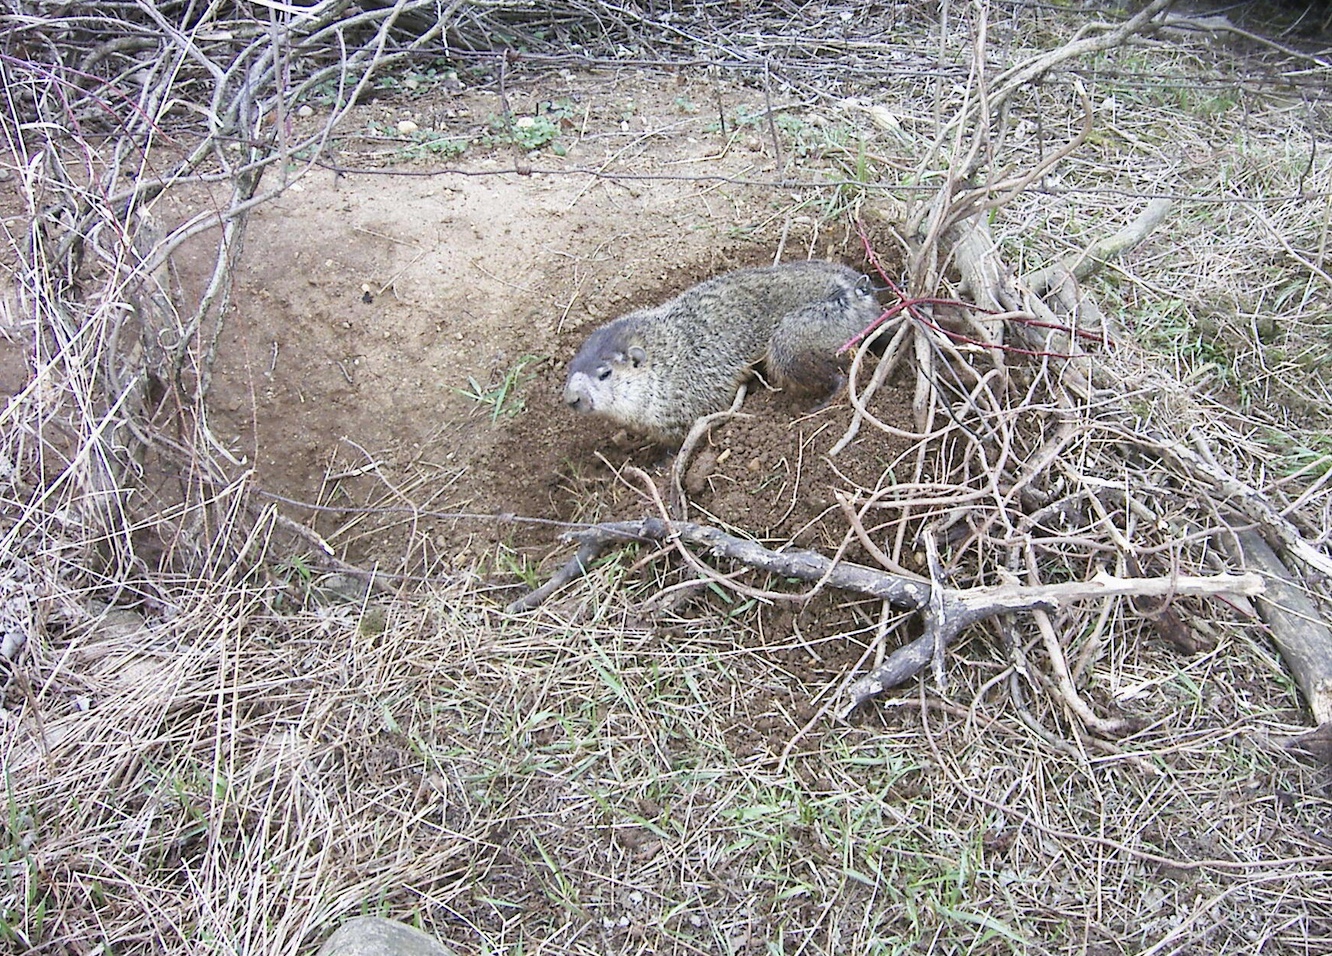 Woodchuck coming out of its burrow under a wire fence-line.